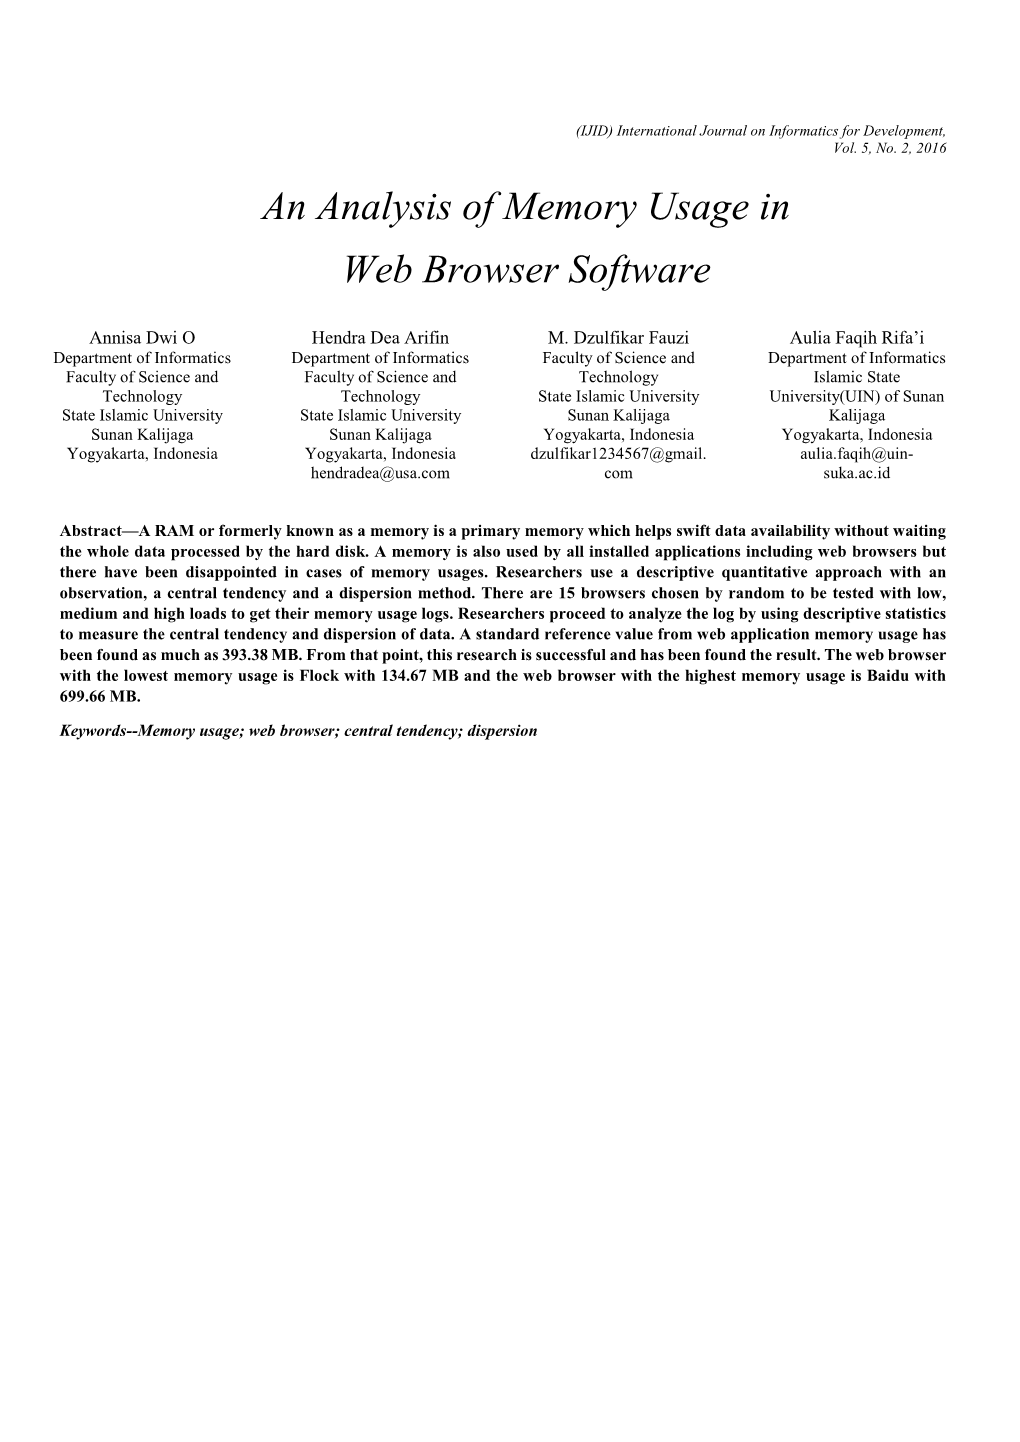 An Analysis of Memory Usage in Web Browser Software